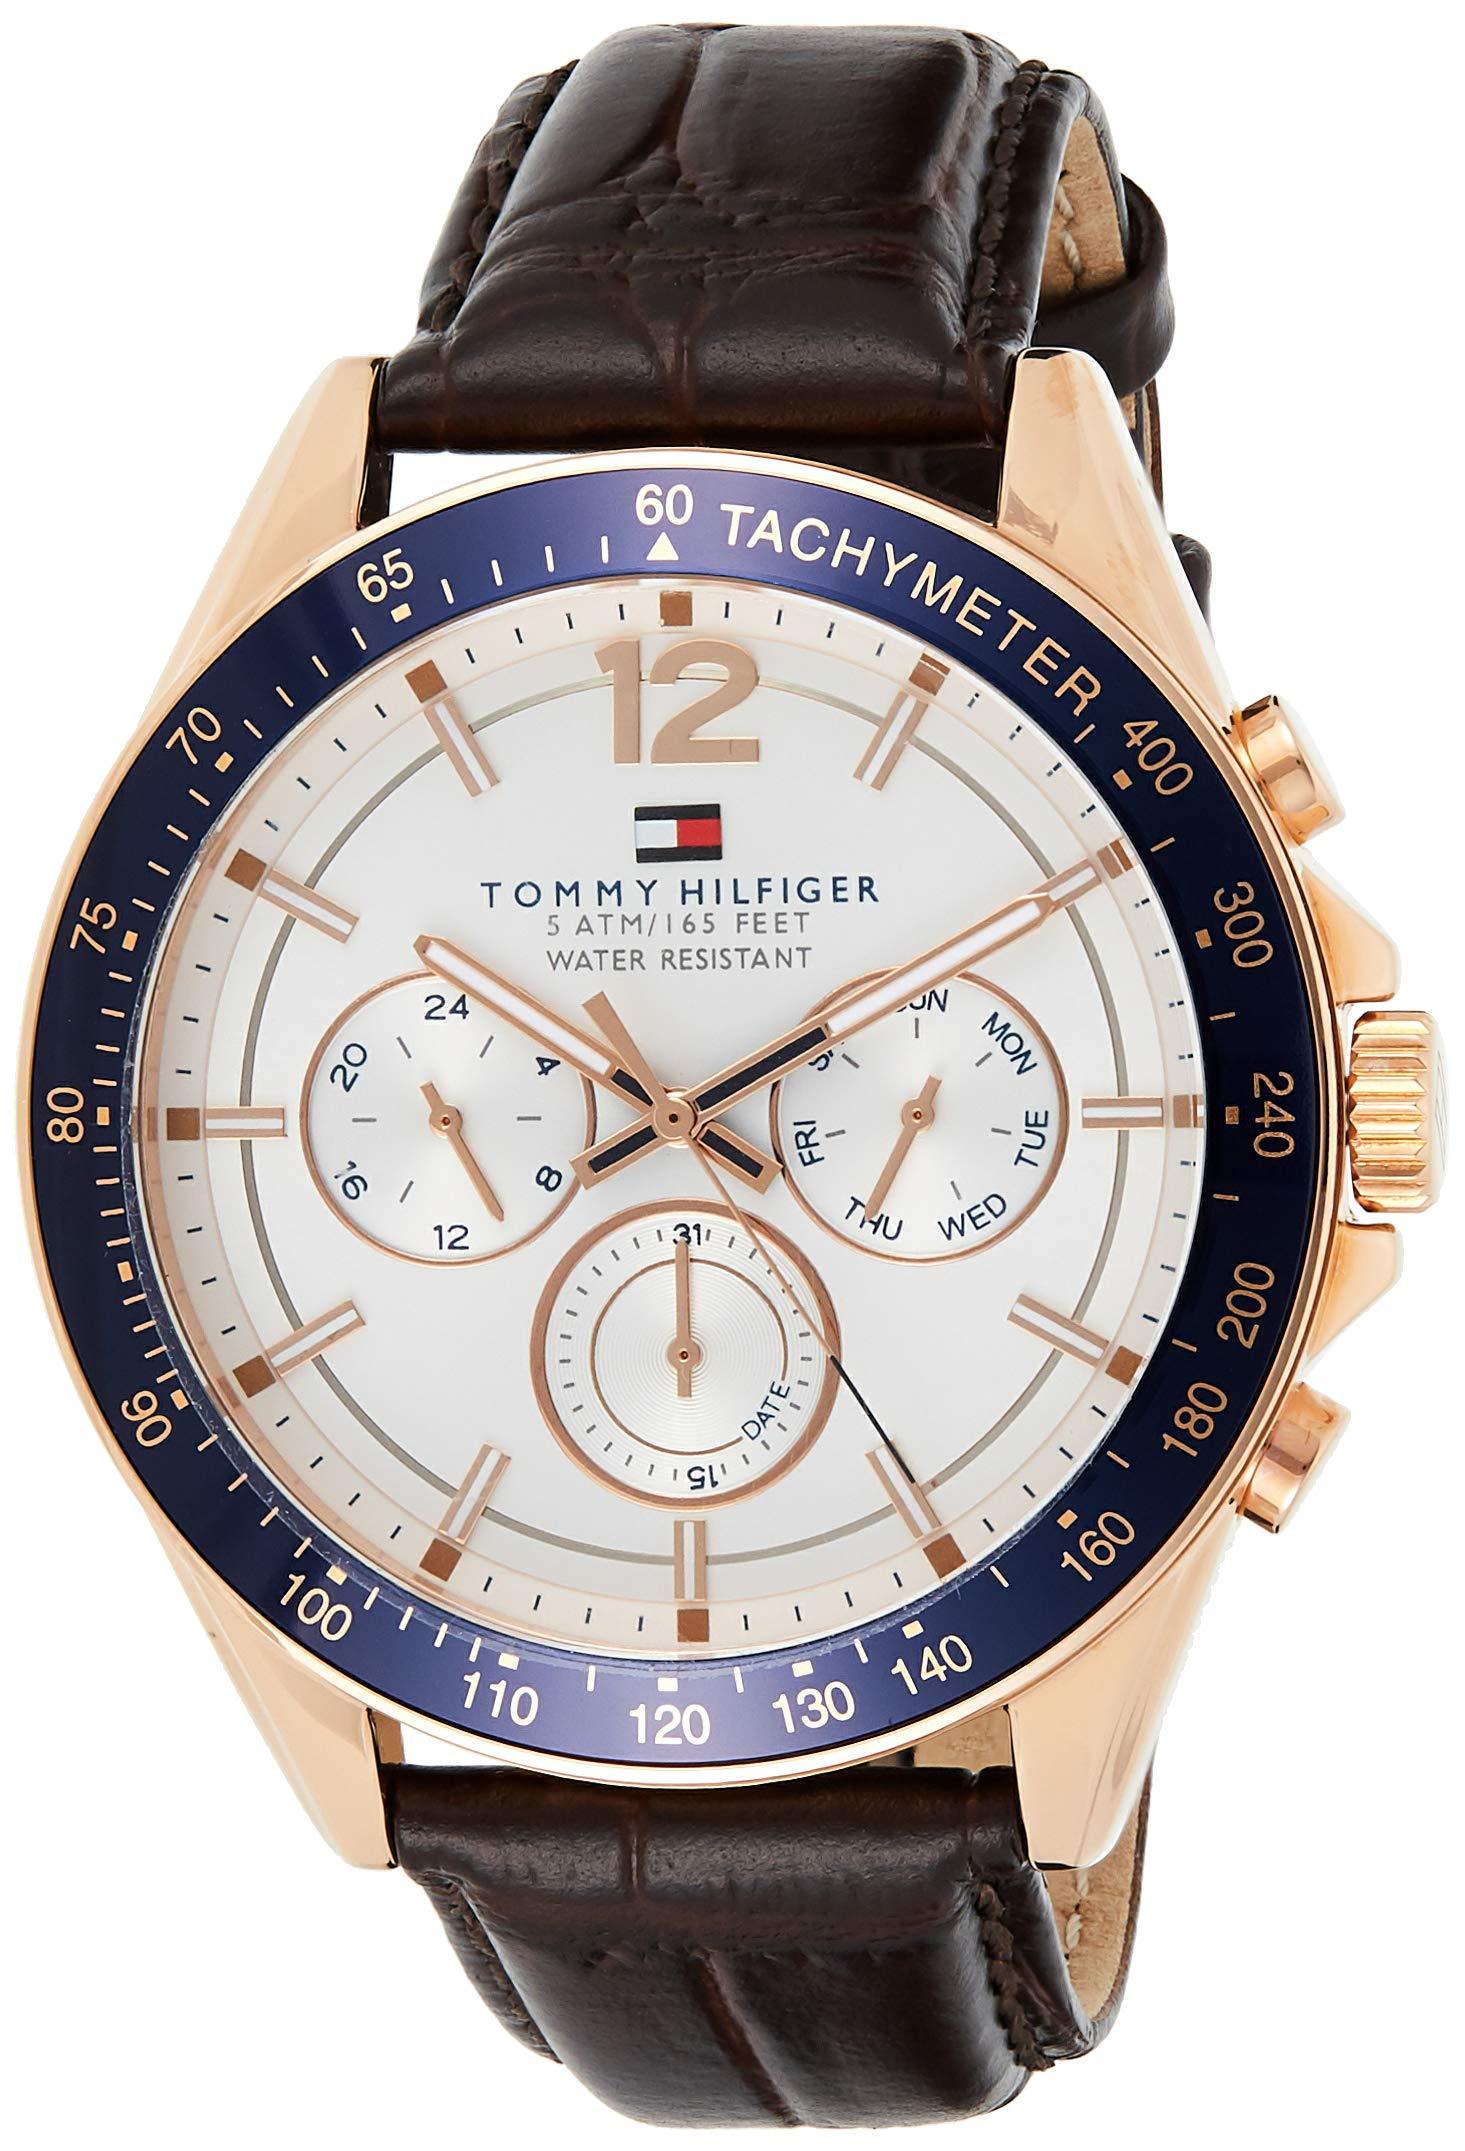 Tommy Hilfiger 1791118 Sophisticated Sport Watch With Brown Leather Band in  Gold (Metallic) for Men - Save 40% - Lyst